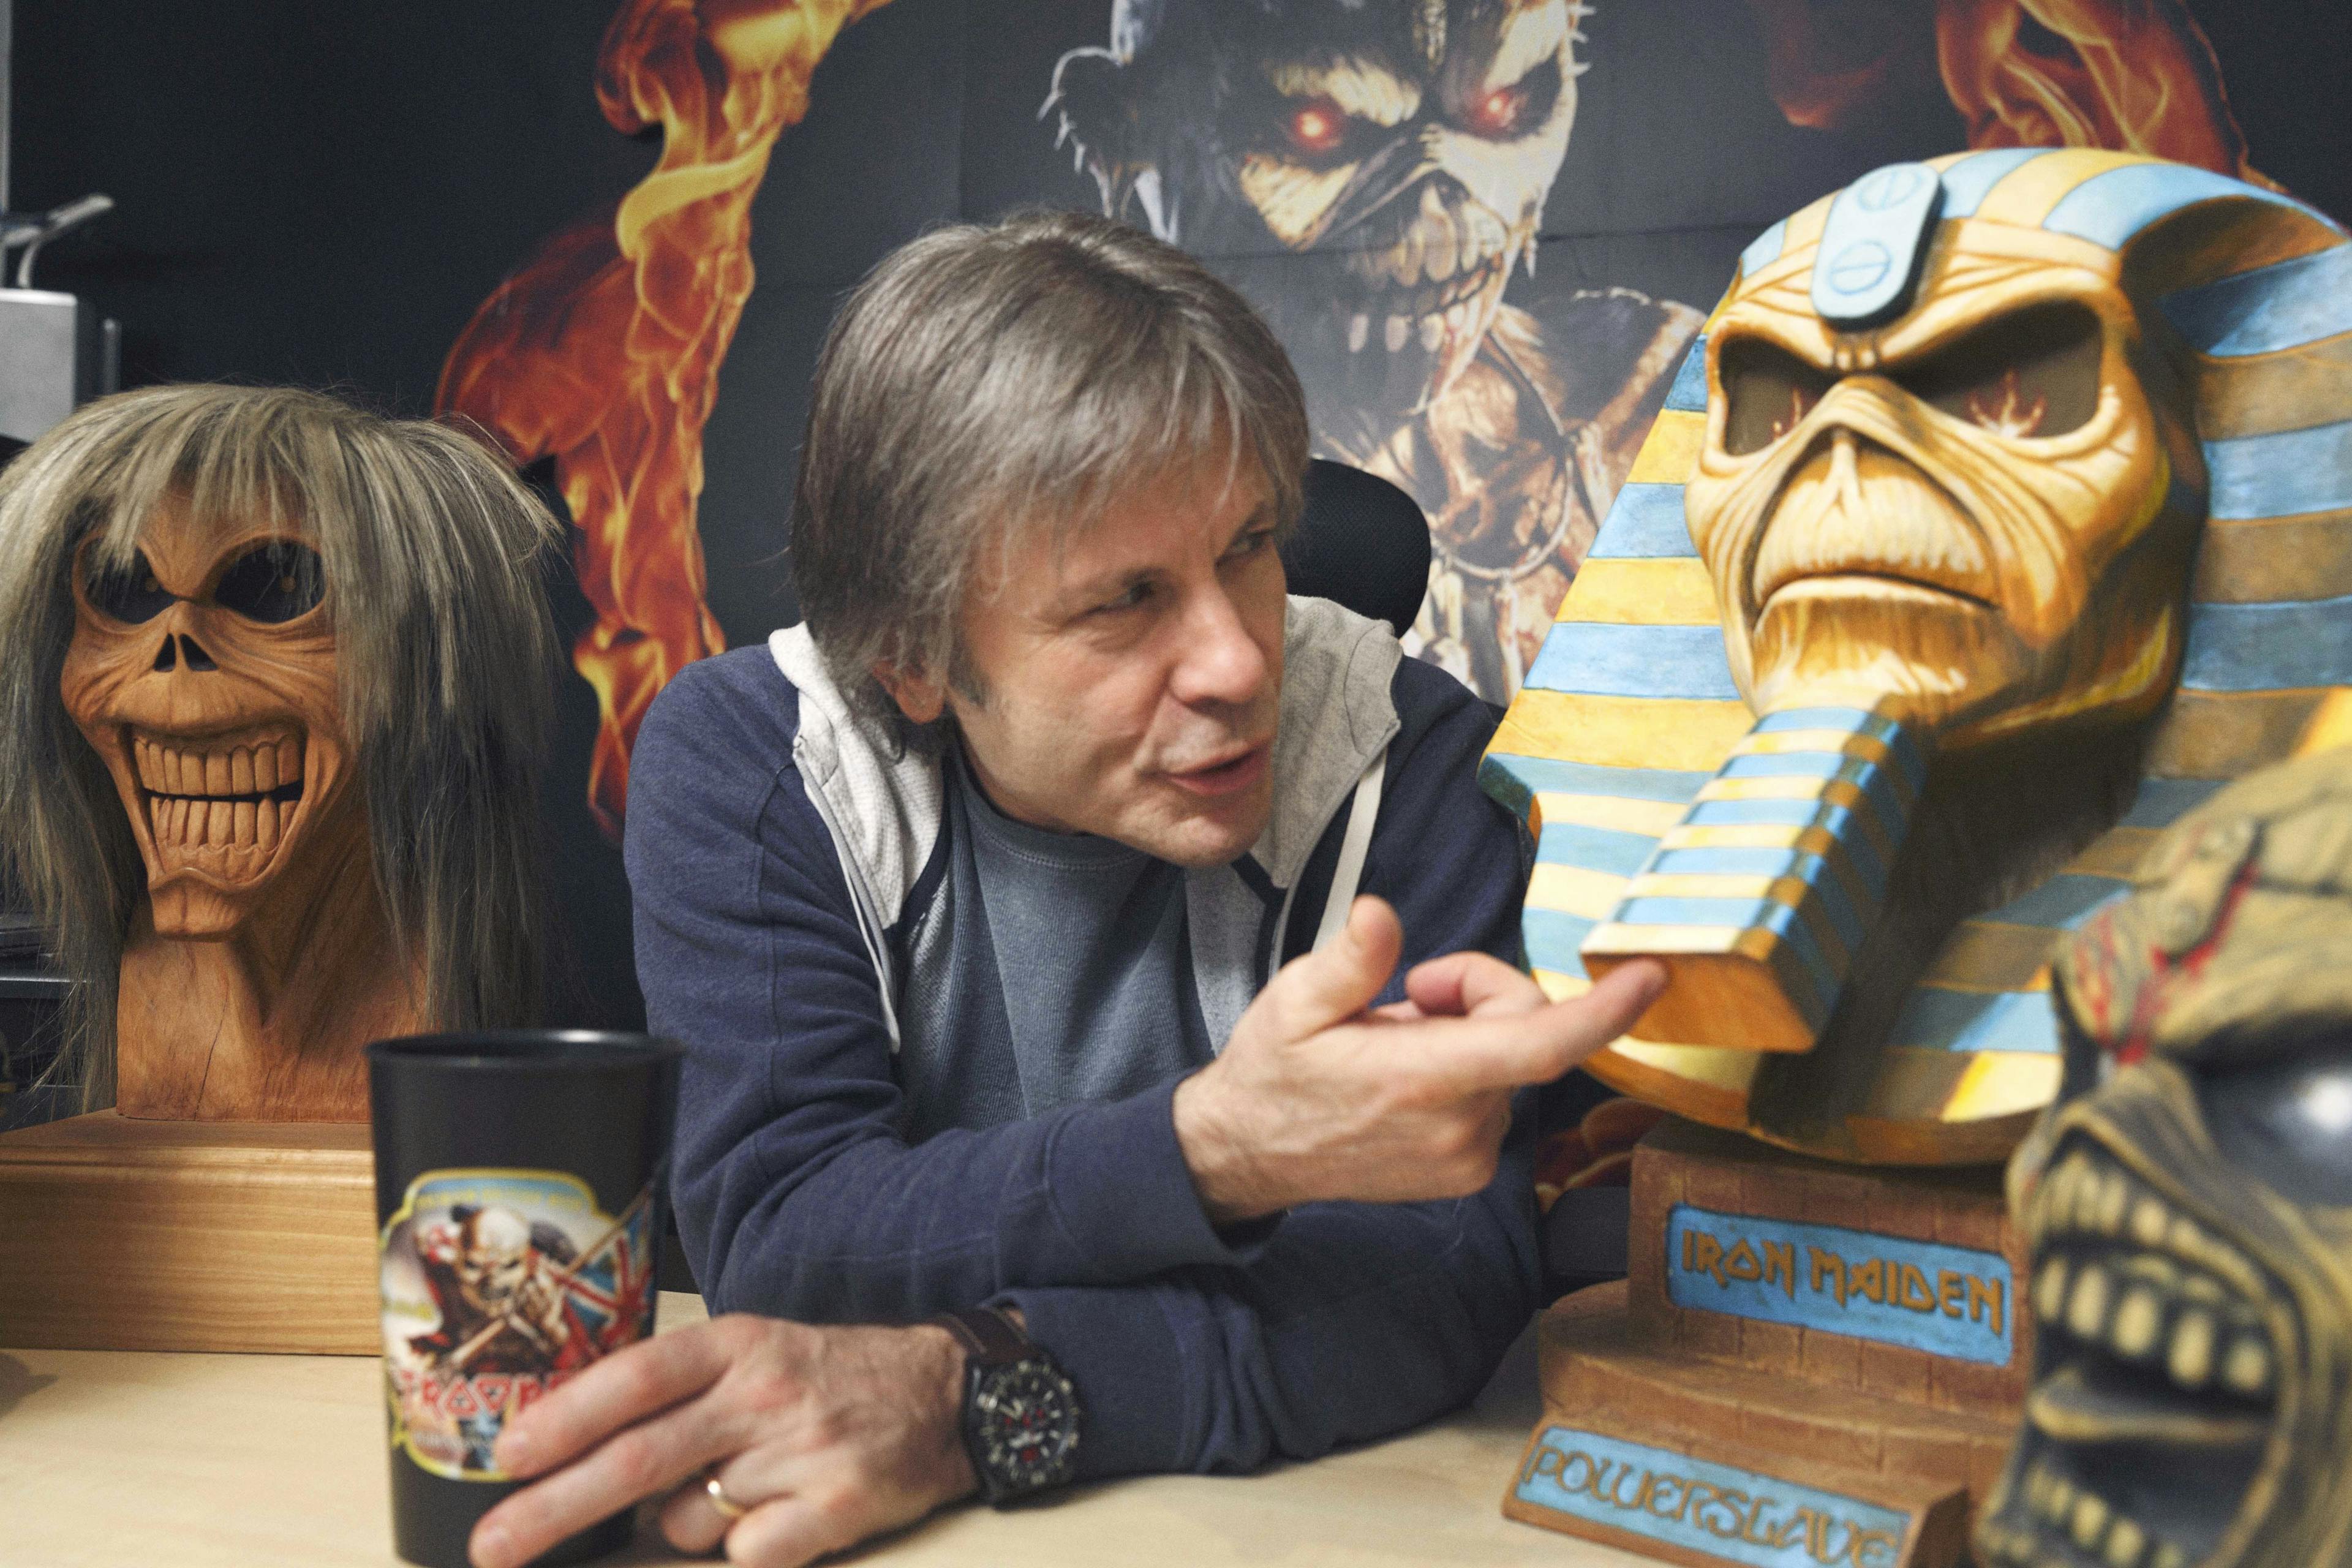 Iron Maiden's Bruce Dickinson on the shows that made him who he is